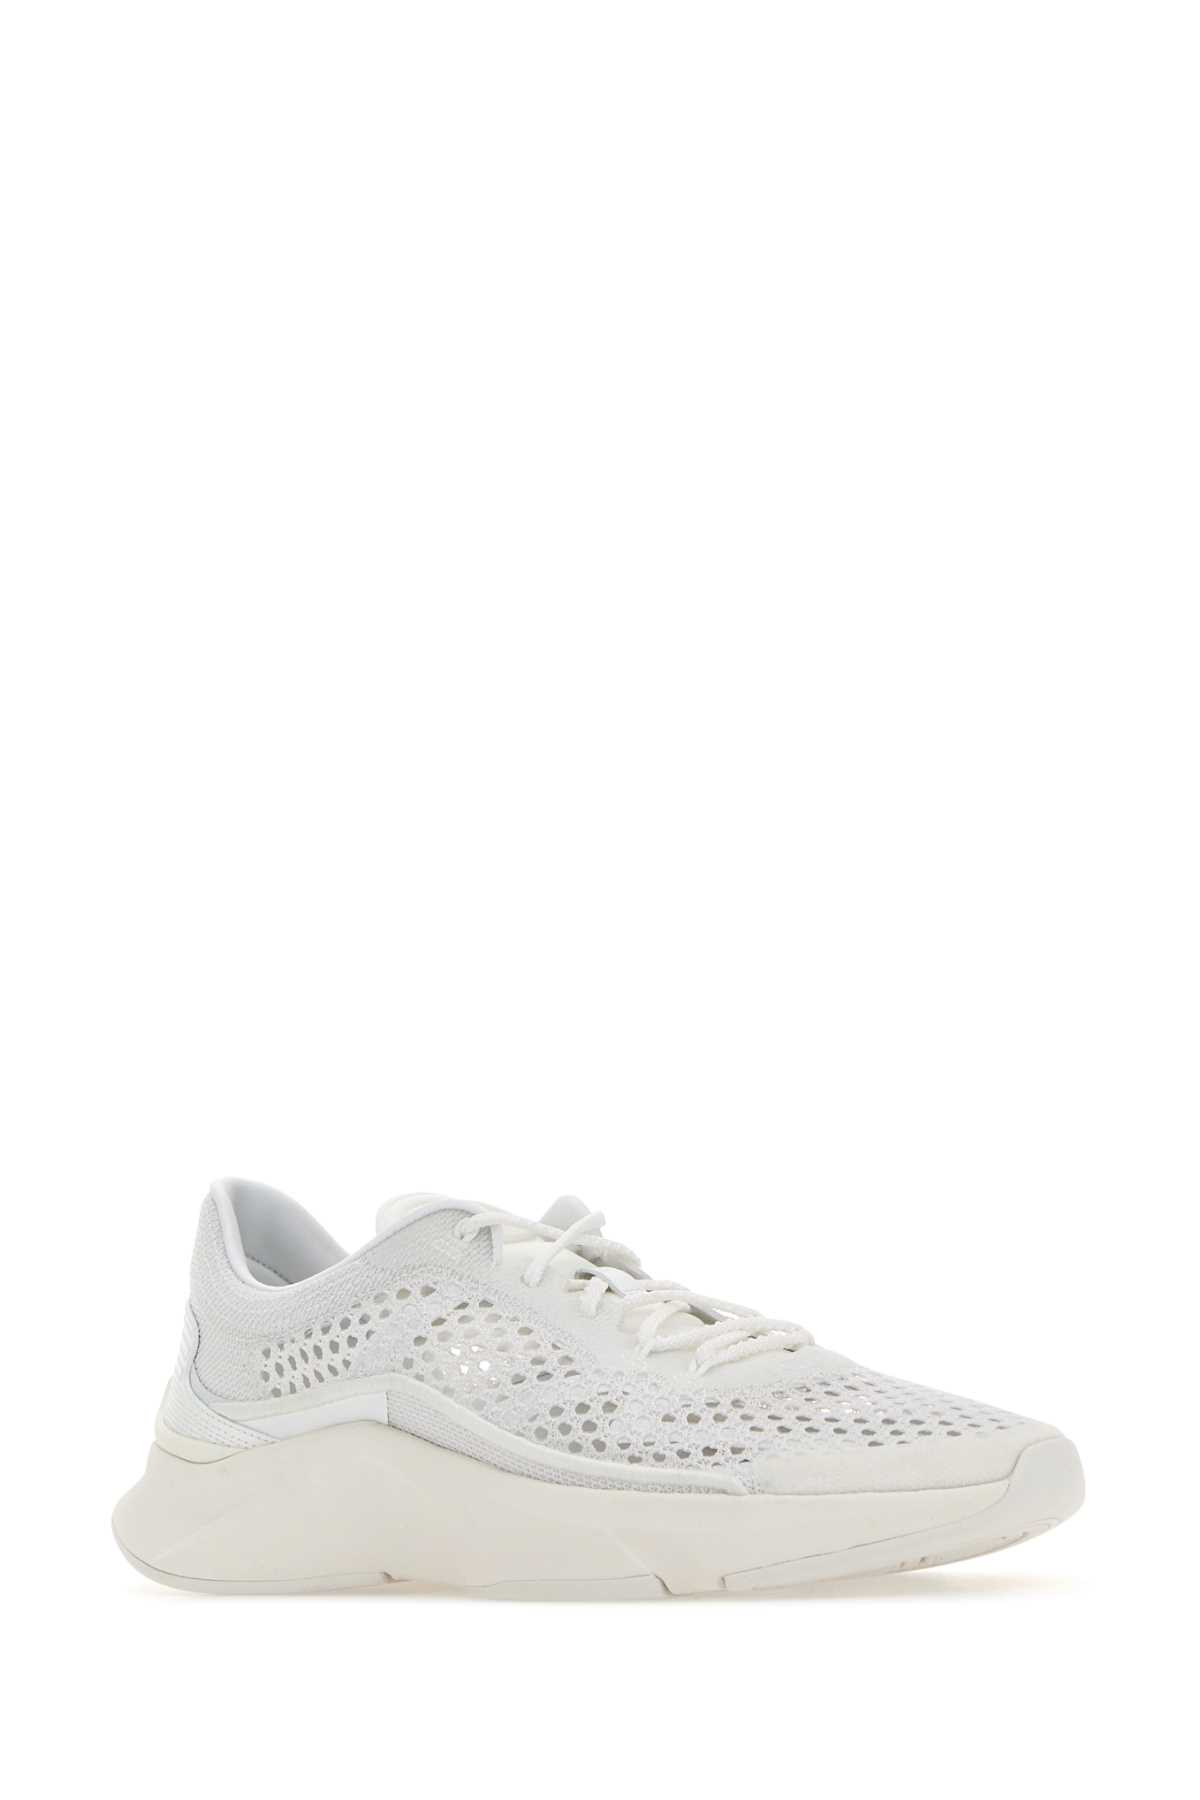 Shop Valentino White Mesh True Actress Sneakers In Biancobiancobiancobianco